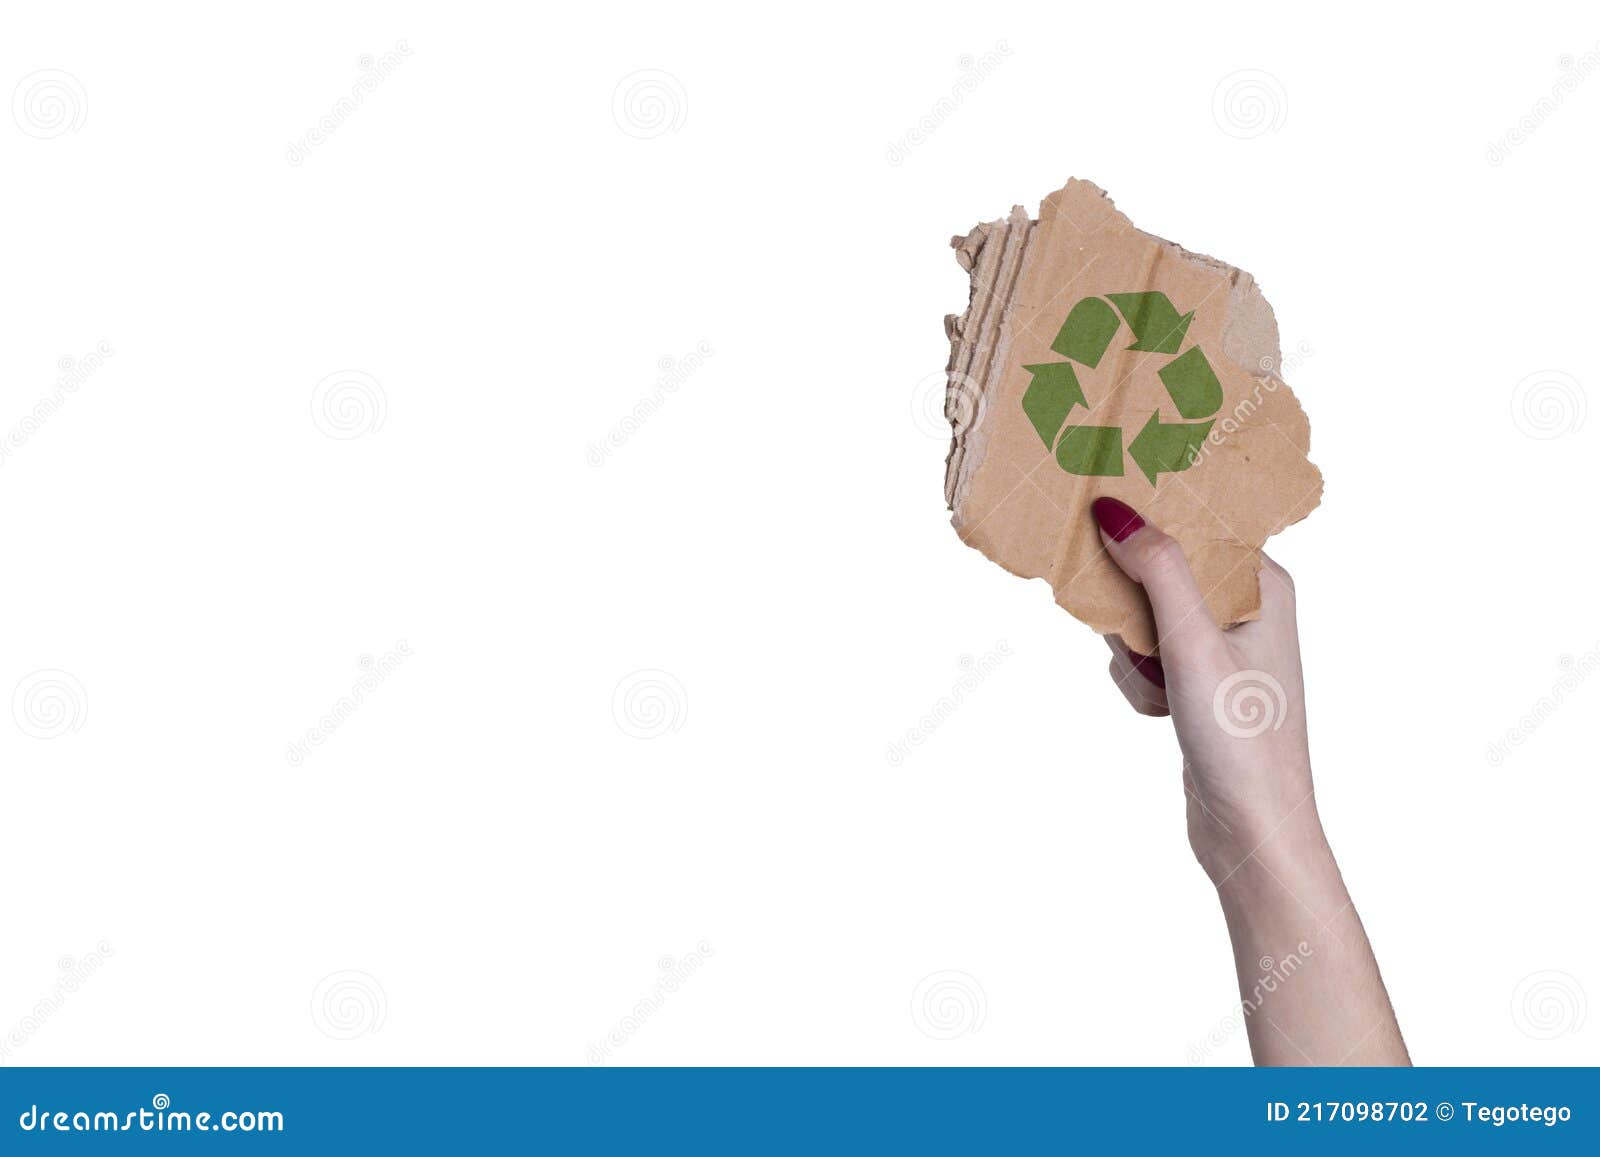 woman hand holding a piece of carton with recycle sign